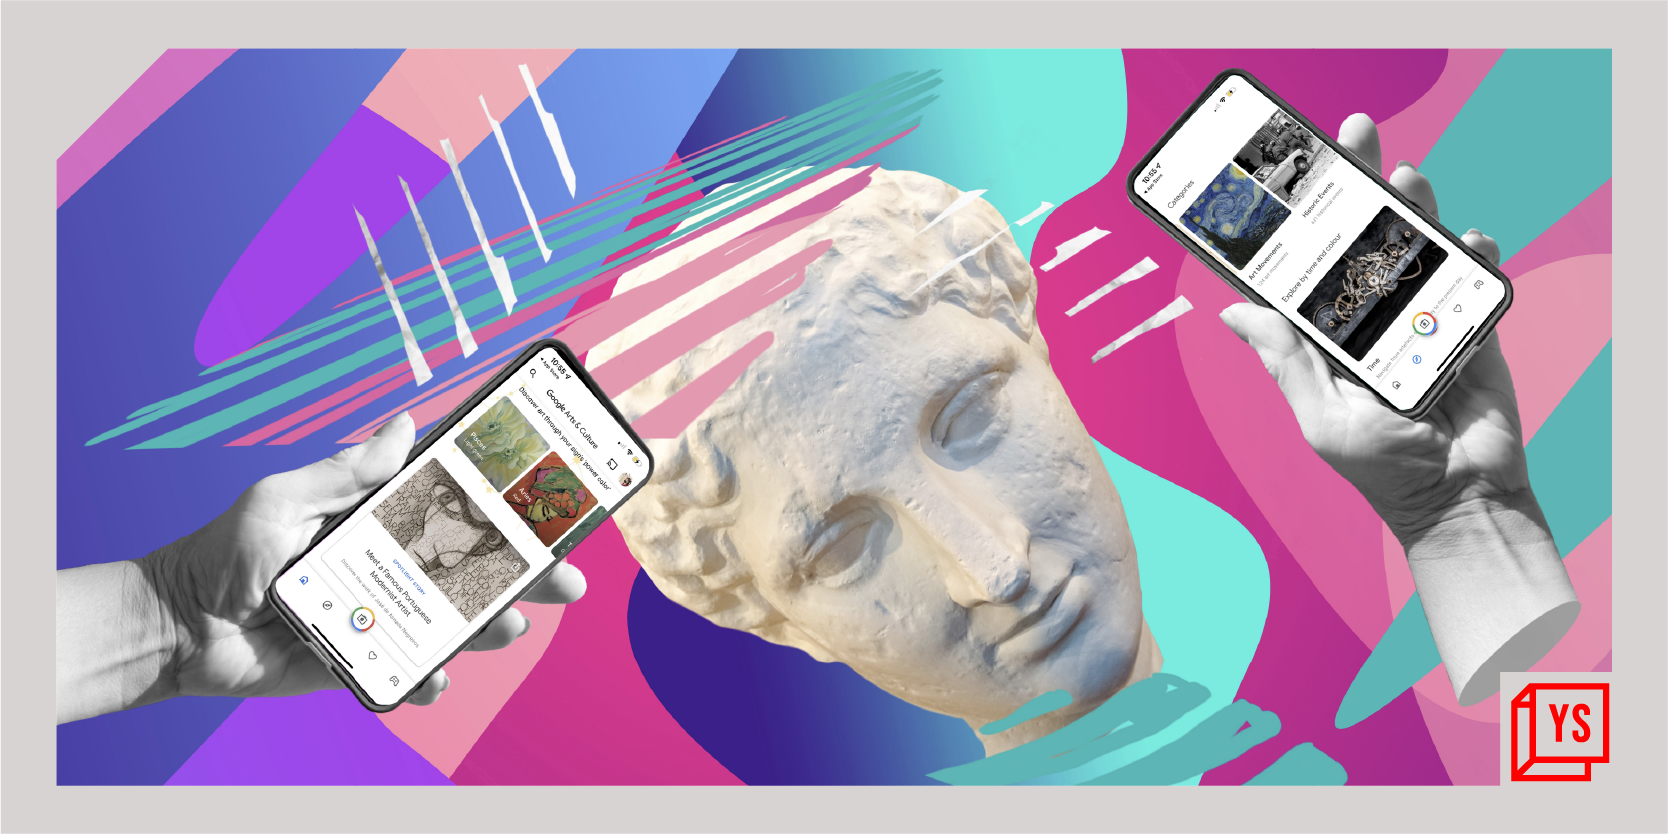 [App Friday] From Japanese manga to the world’s Rothkos and Rodins, Google Arts & Culture brings you closer to art